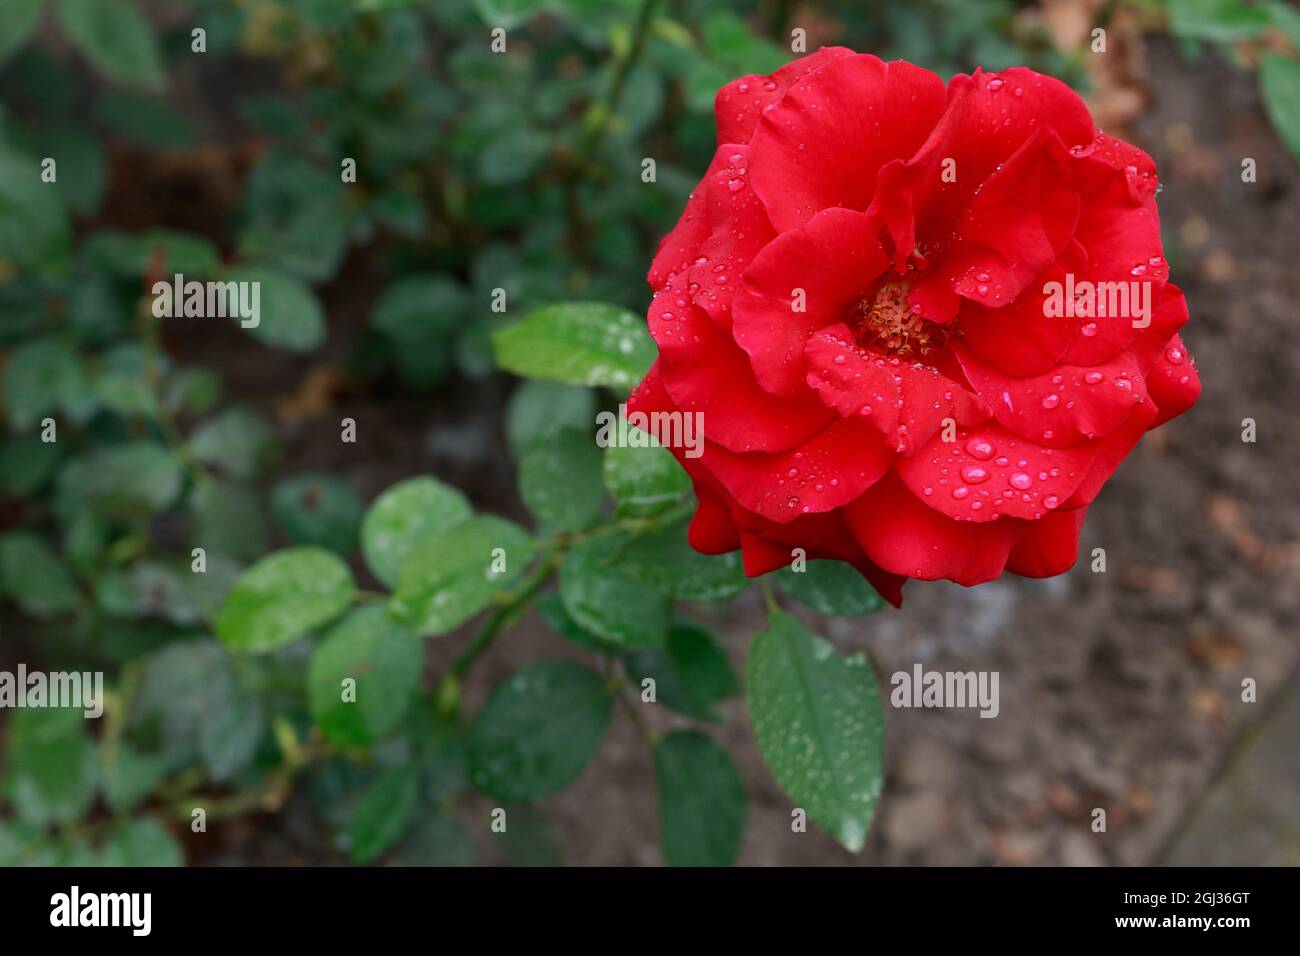 Beautiful red rose in a garden after rain Stock Photo